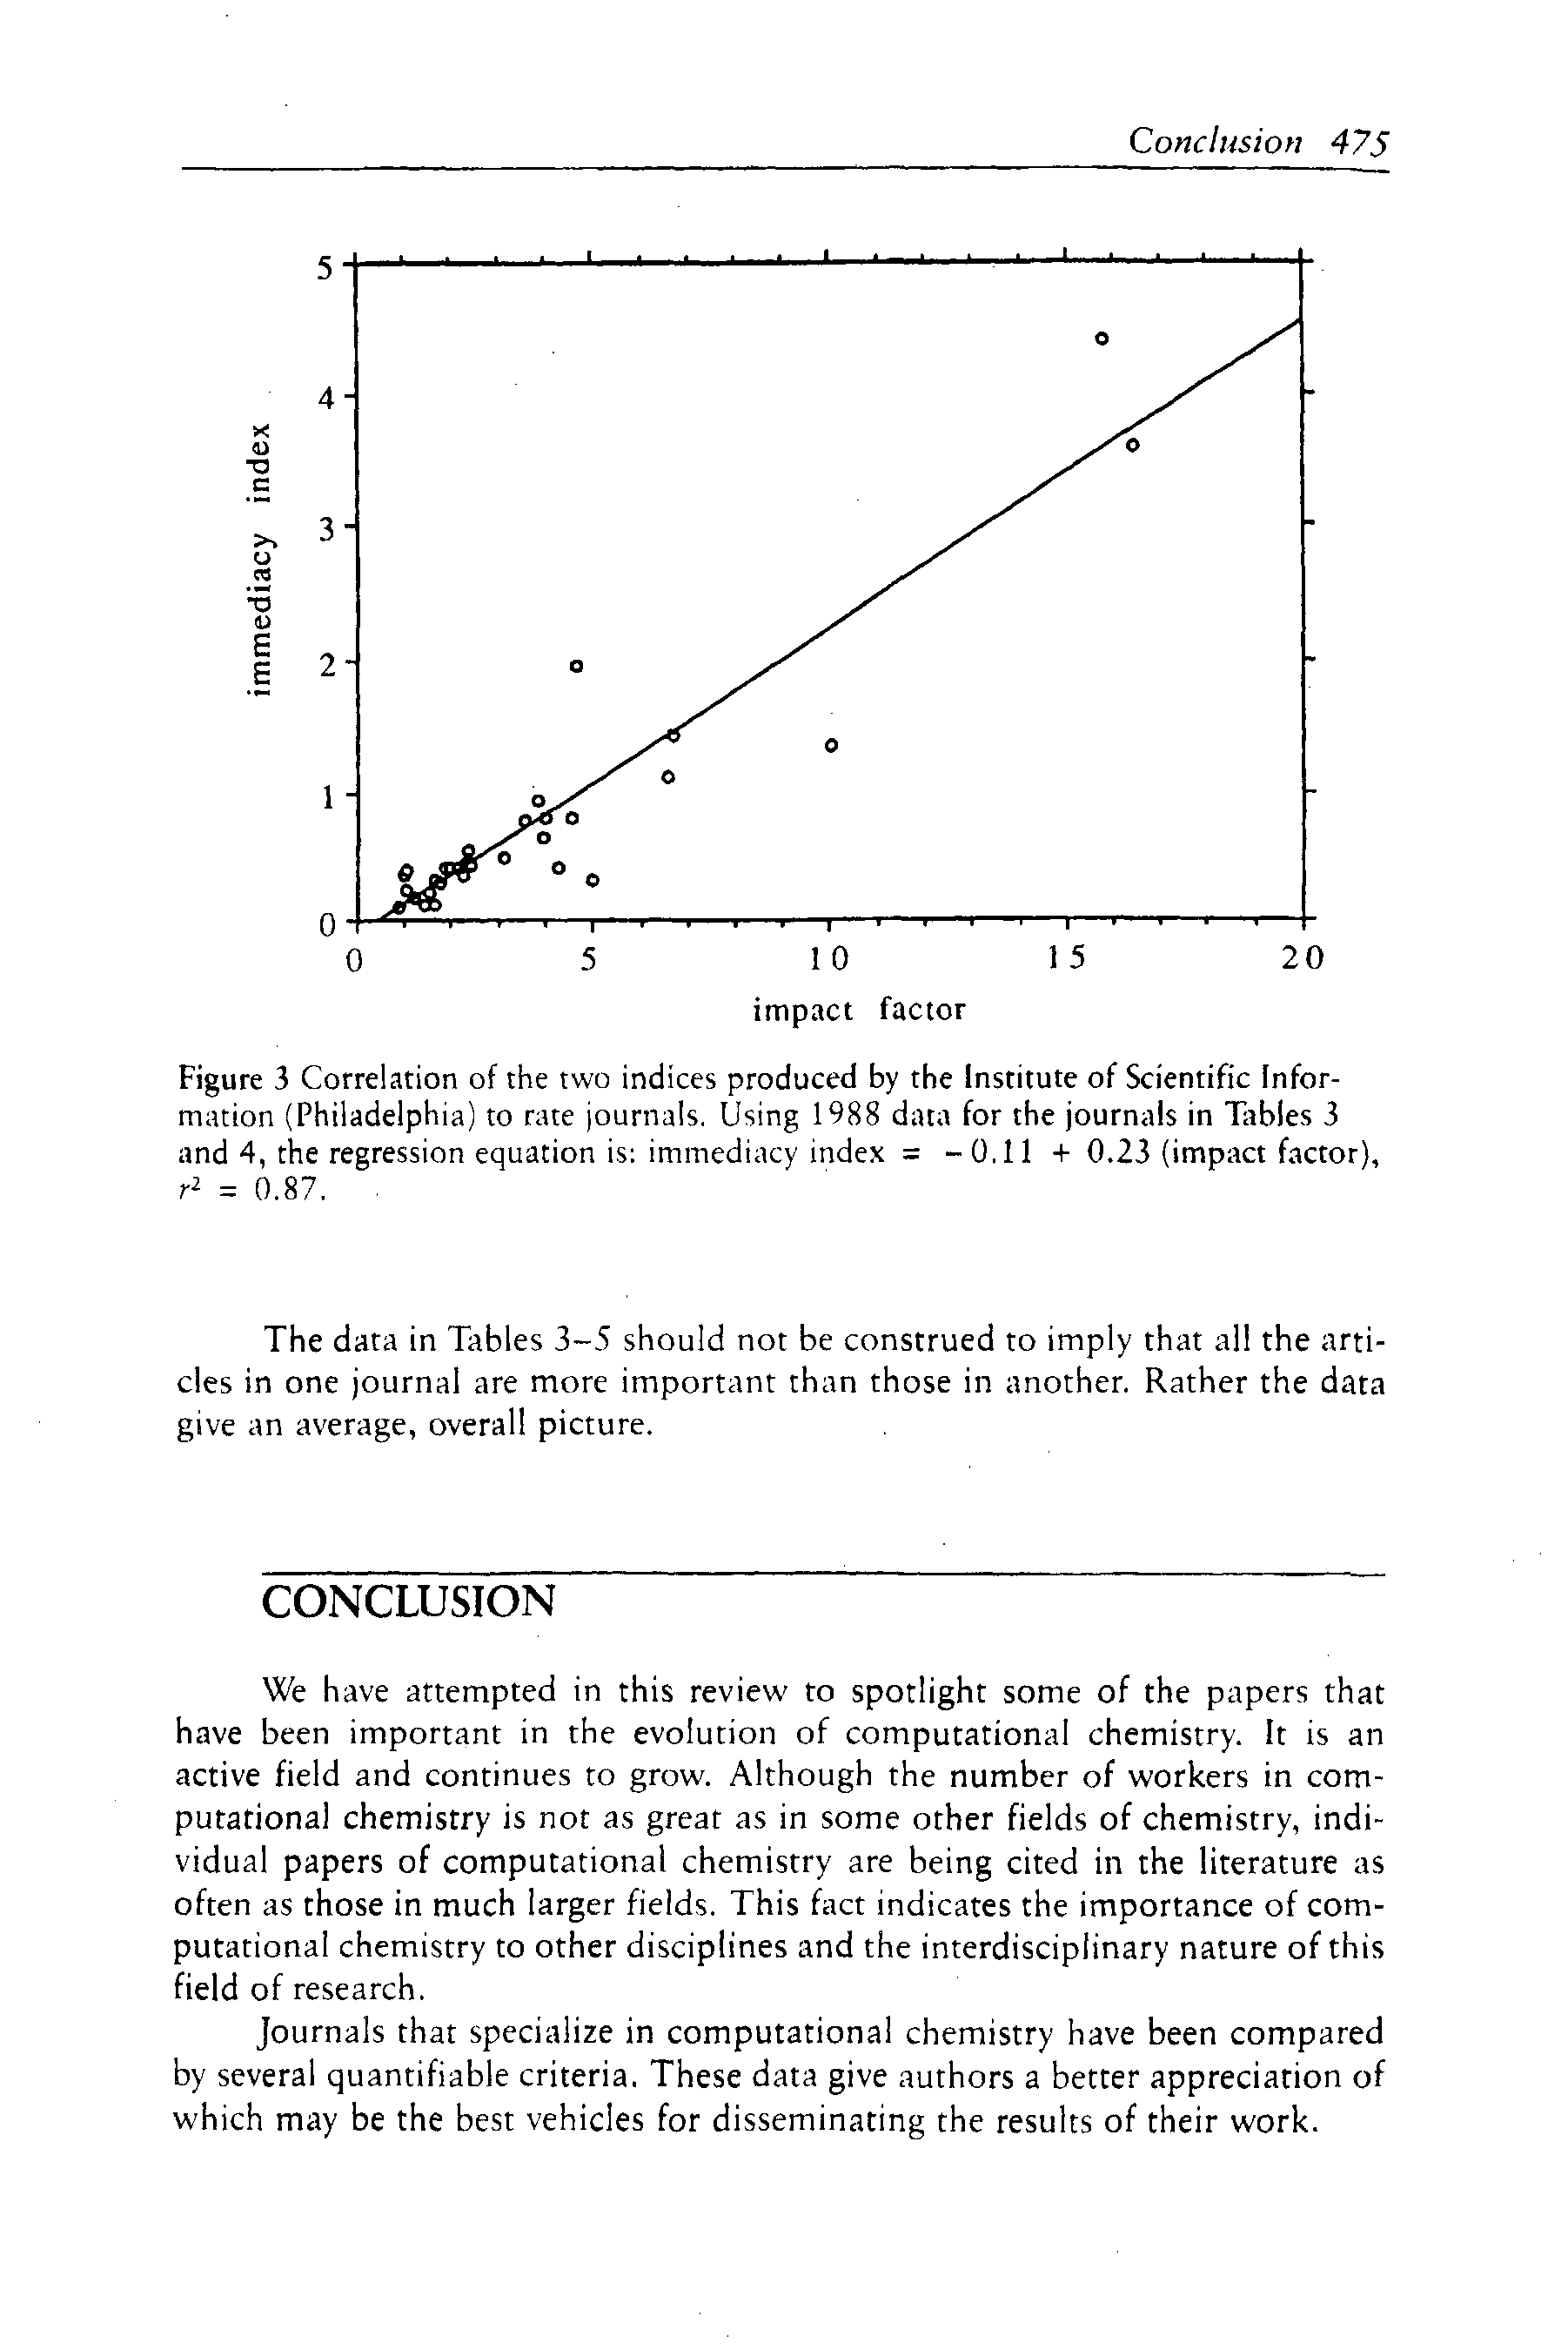 Figure 3 Correlation of the two indices produced by the Institute of Scientific Information (Philadelphia) to rate journals. Using 1988 data for the journals in Tlibles 3 and 4, the regression equation is immediacy index = -0.11 0.23 (impact factor),...